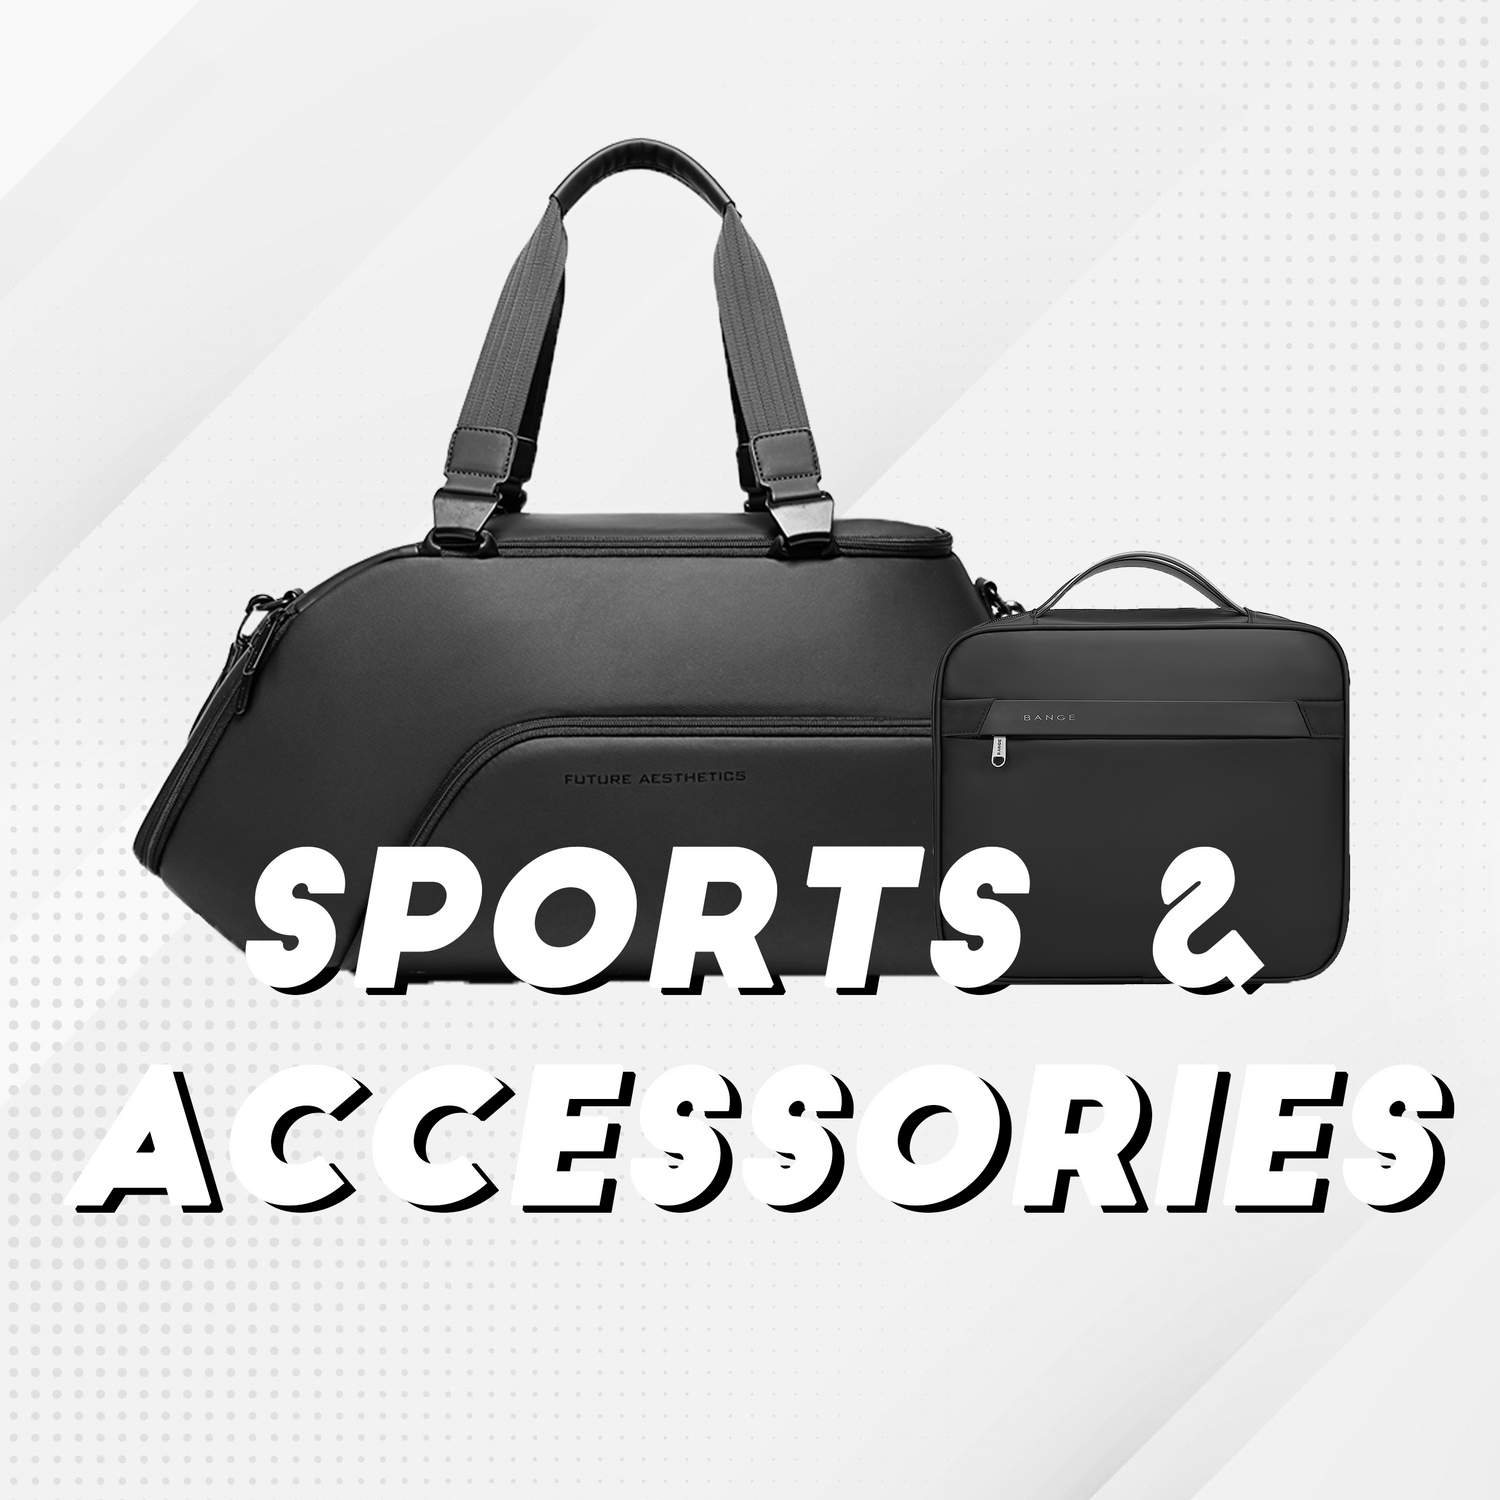 All Sports & Accessories